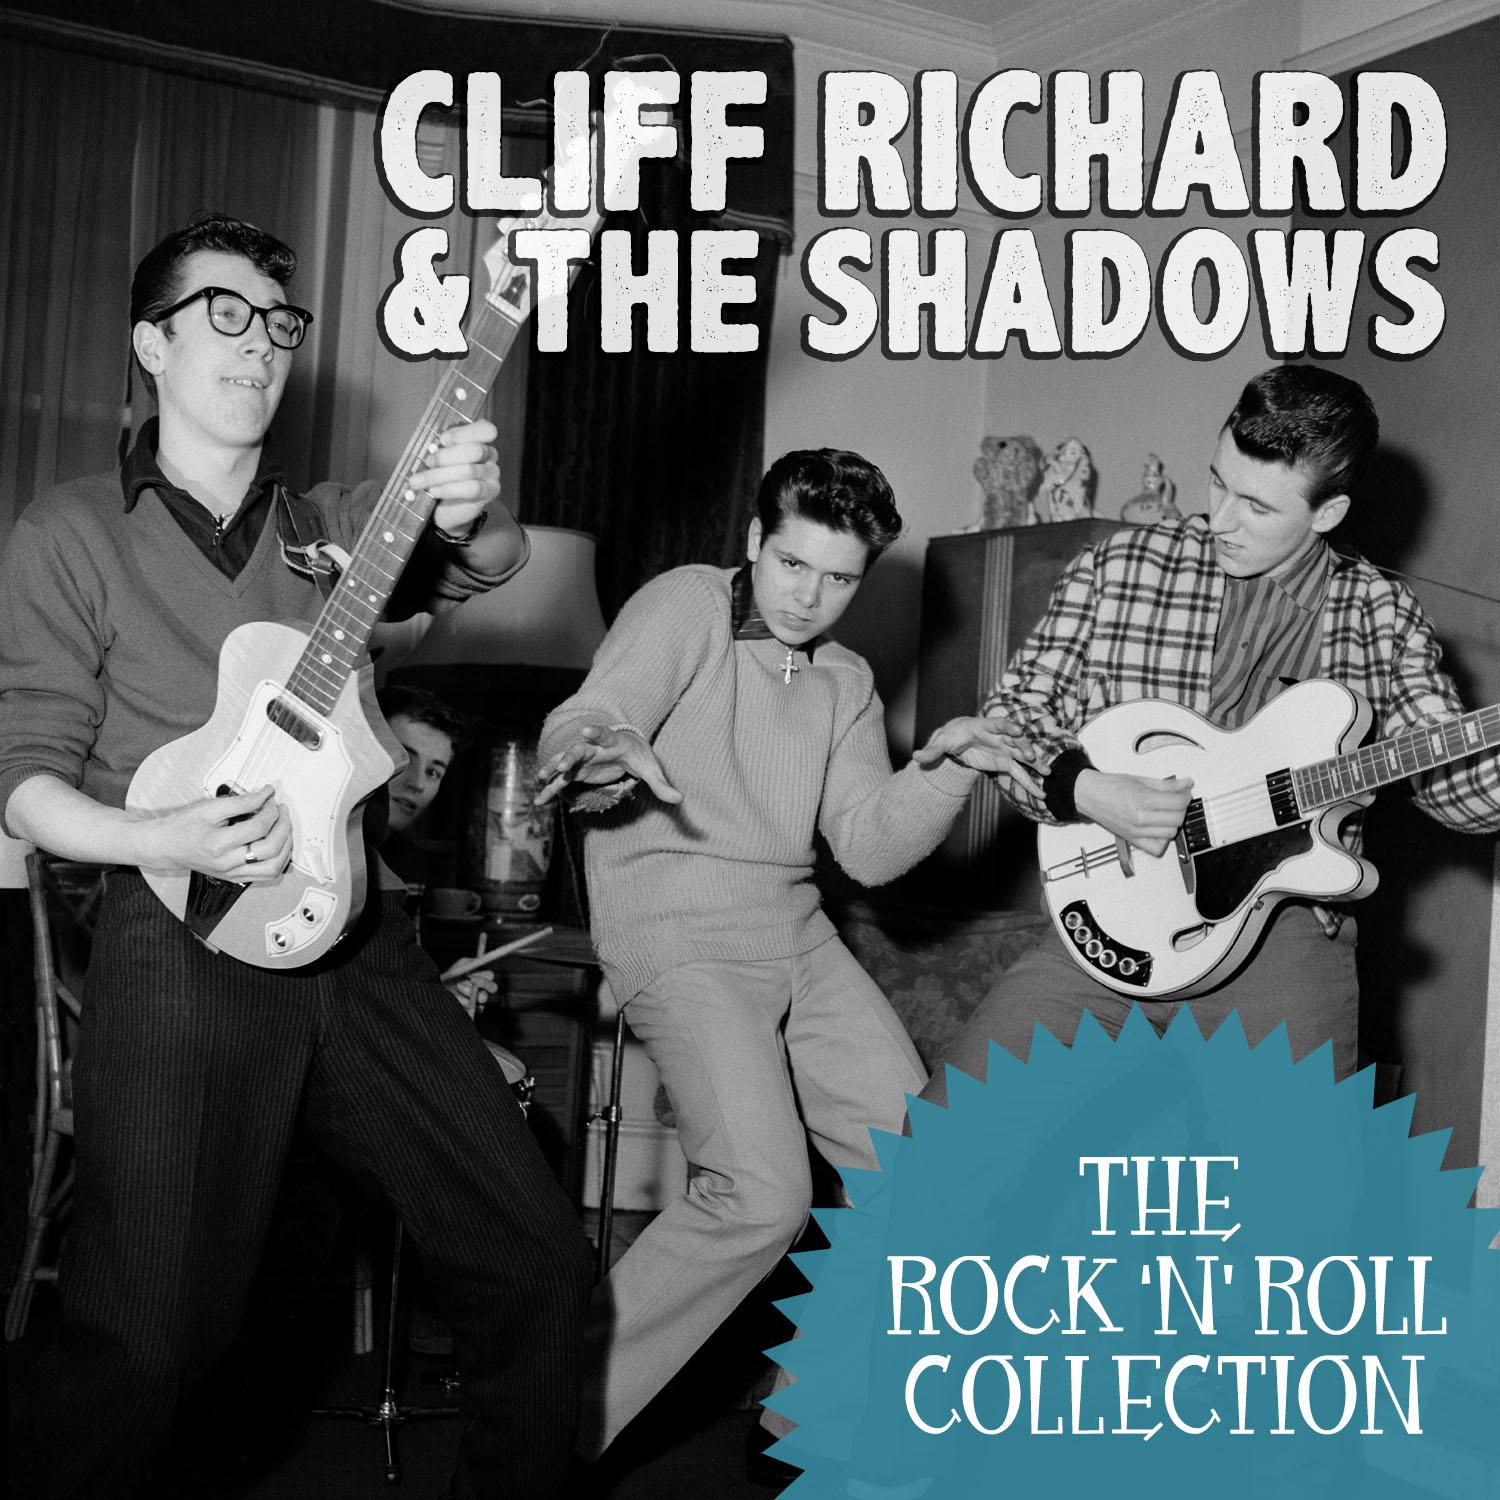 The Rock 'N' Roll Collection: Cliff Richard & The Shadows